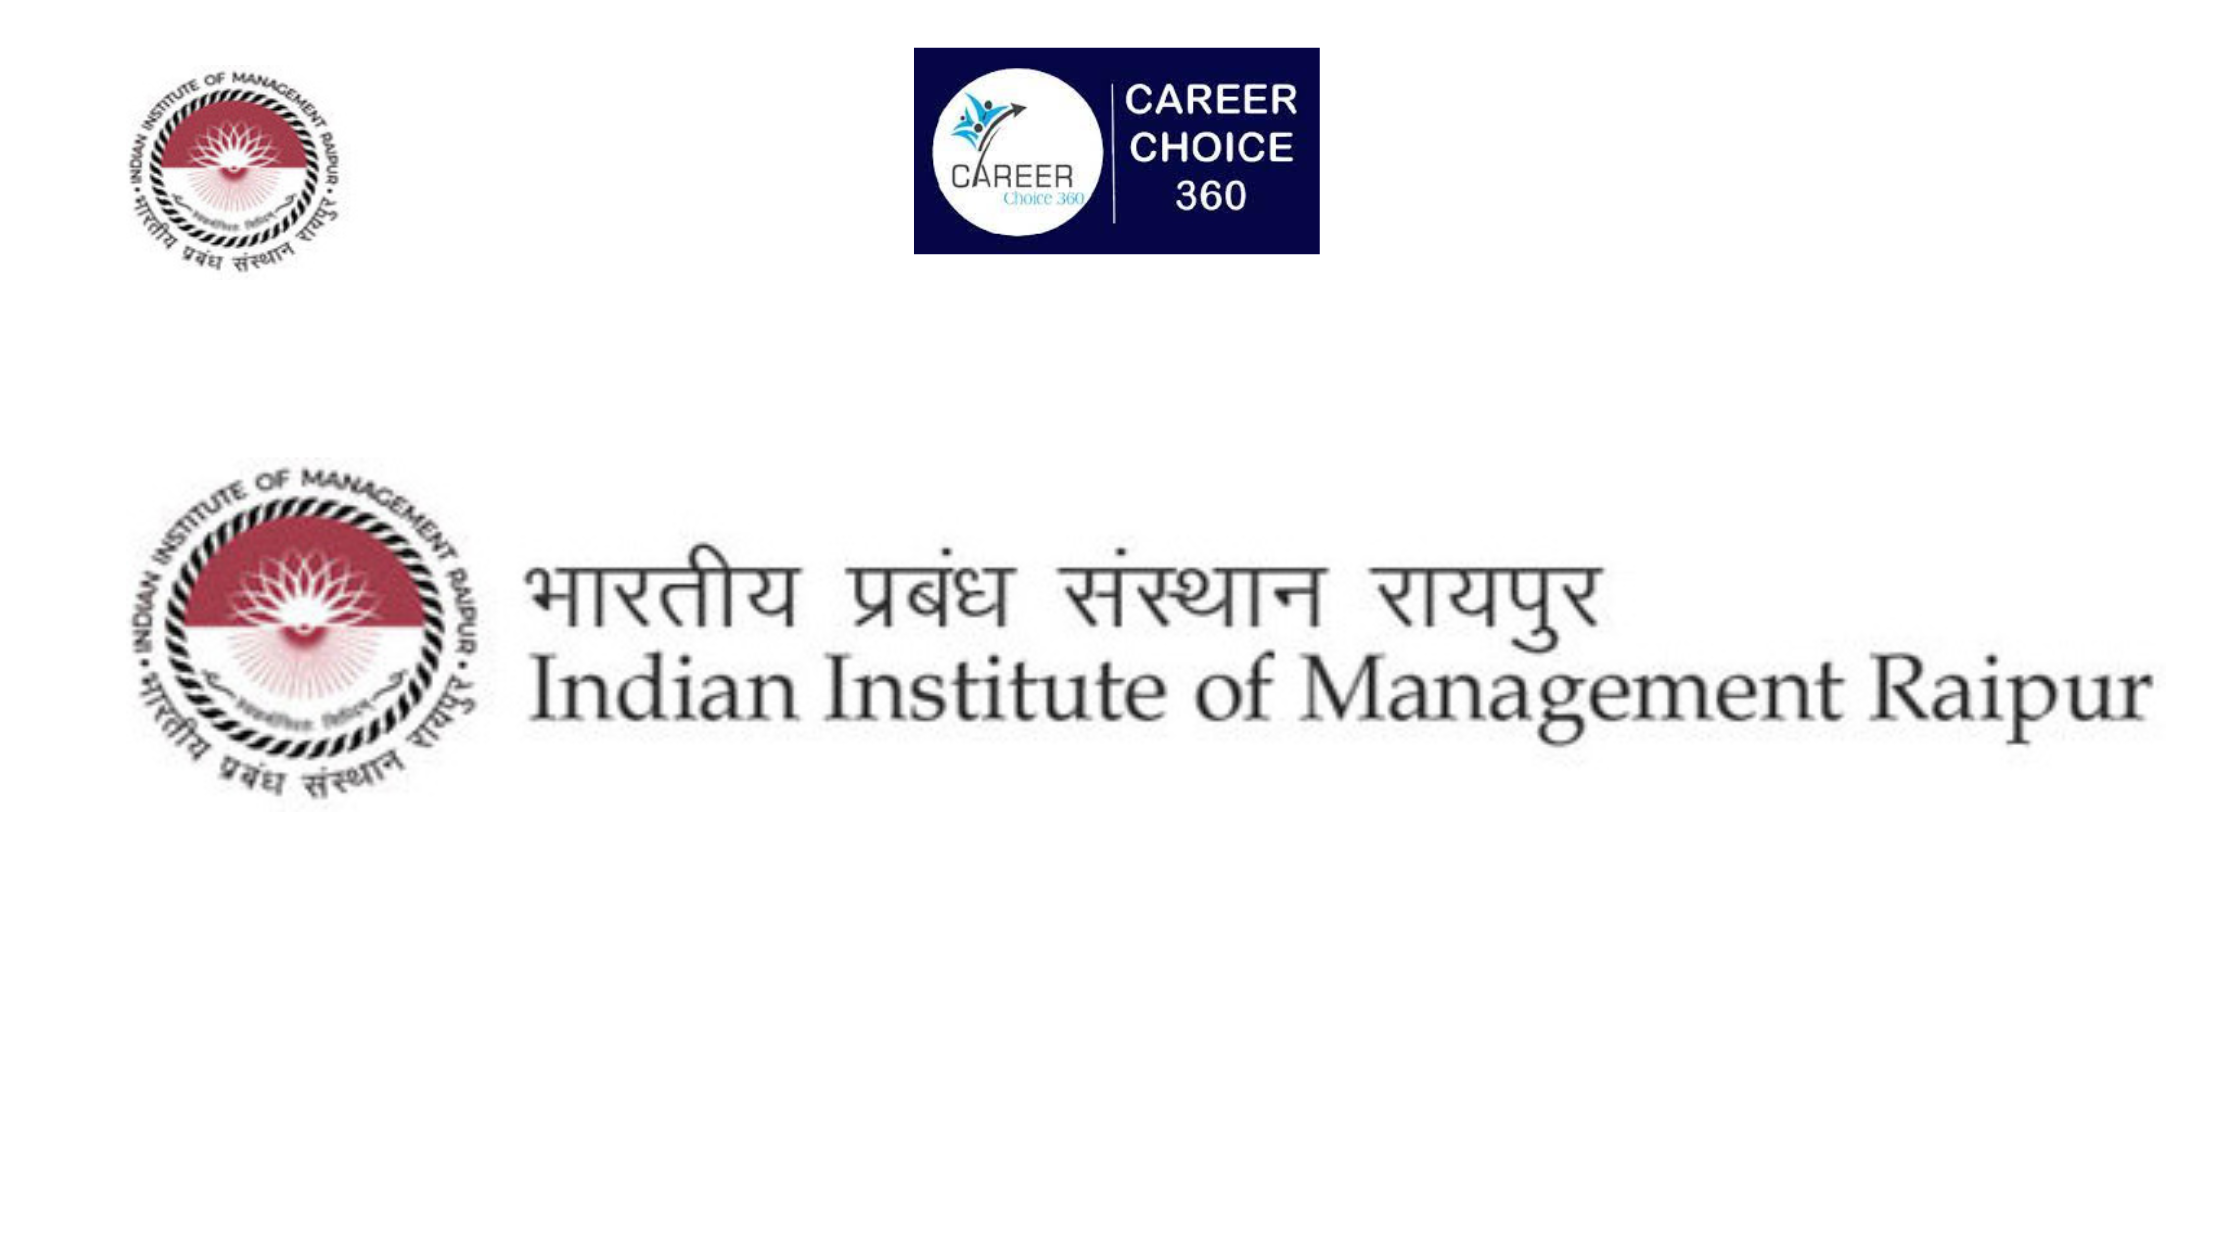 You are currently viewing The Indian Institute of Management Raipur (IIM Raipur) : Course & Fees, Admission procedure, Rankings, and Placements